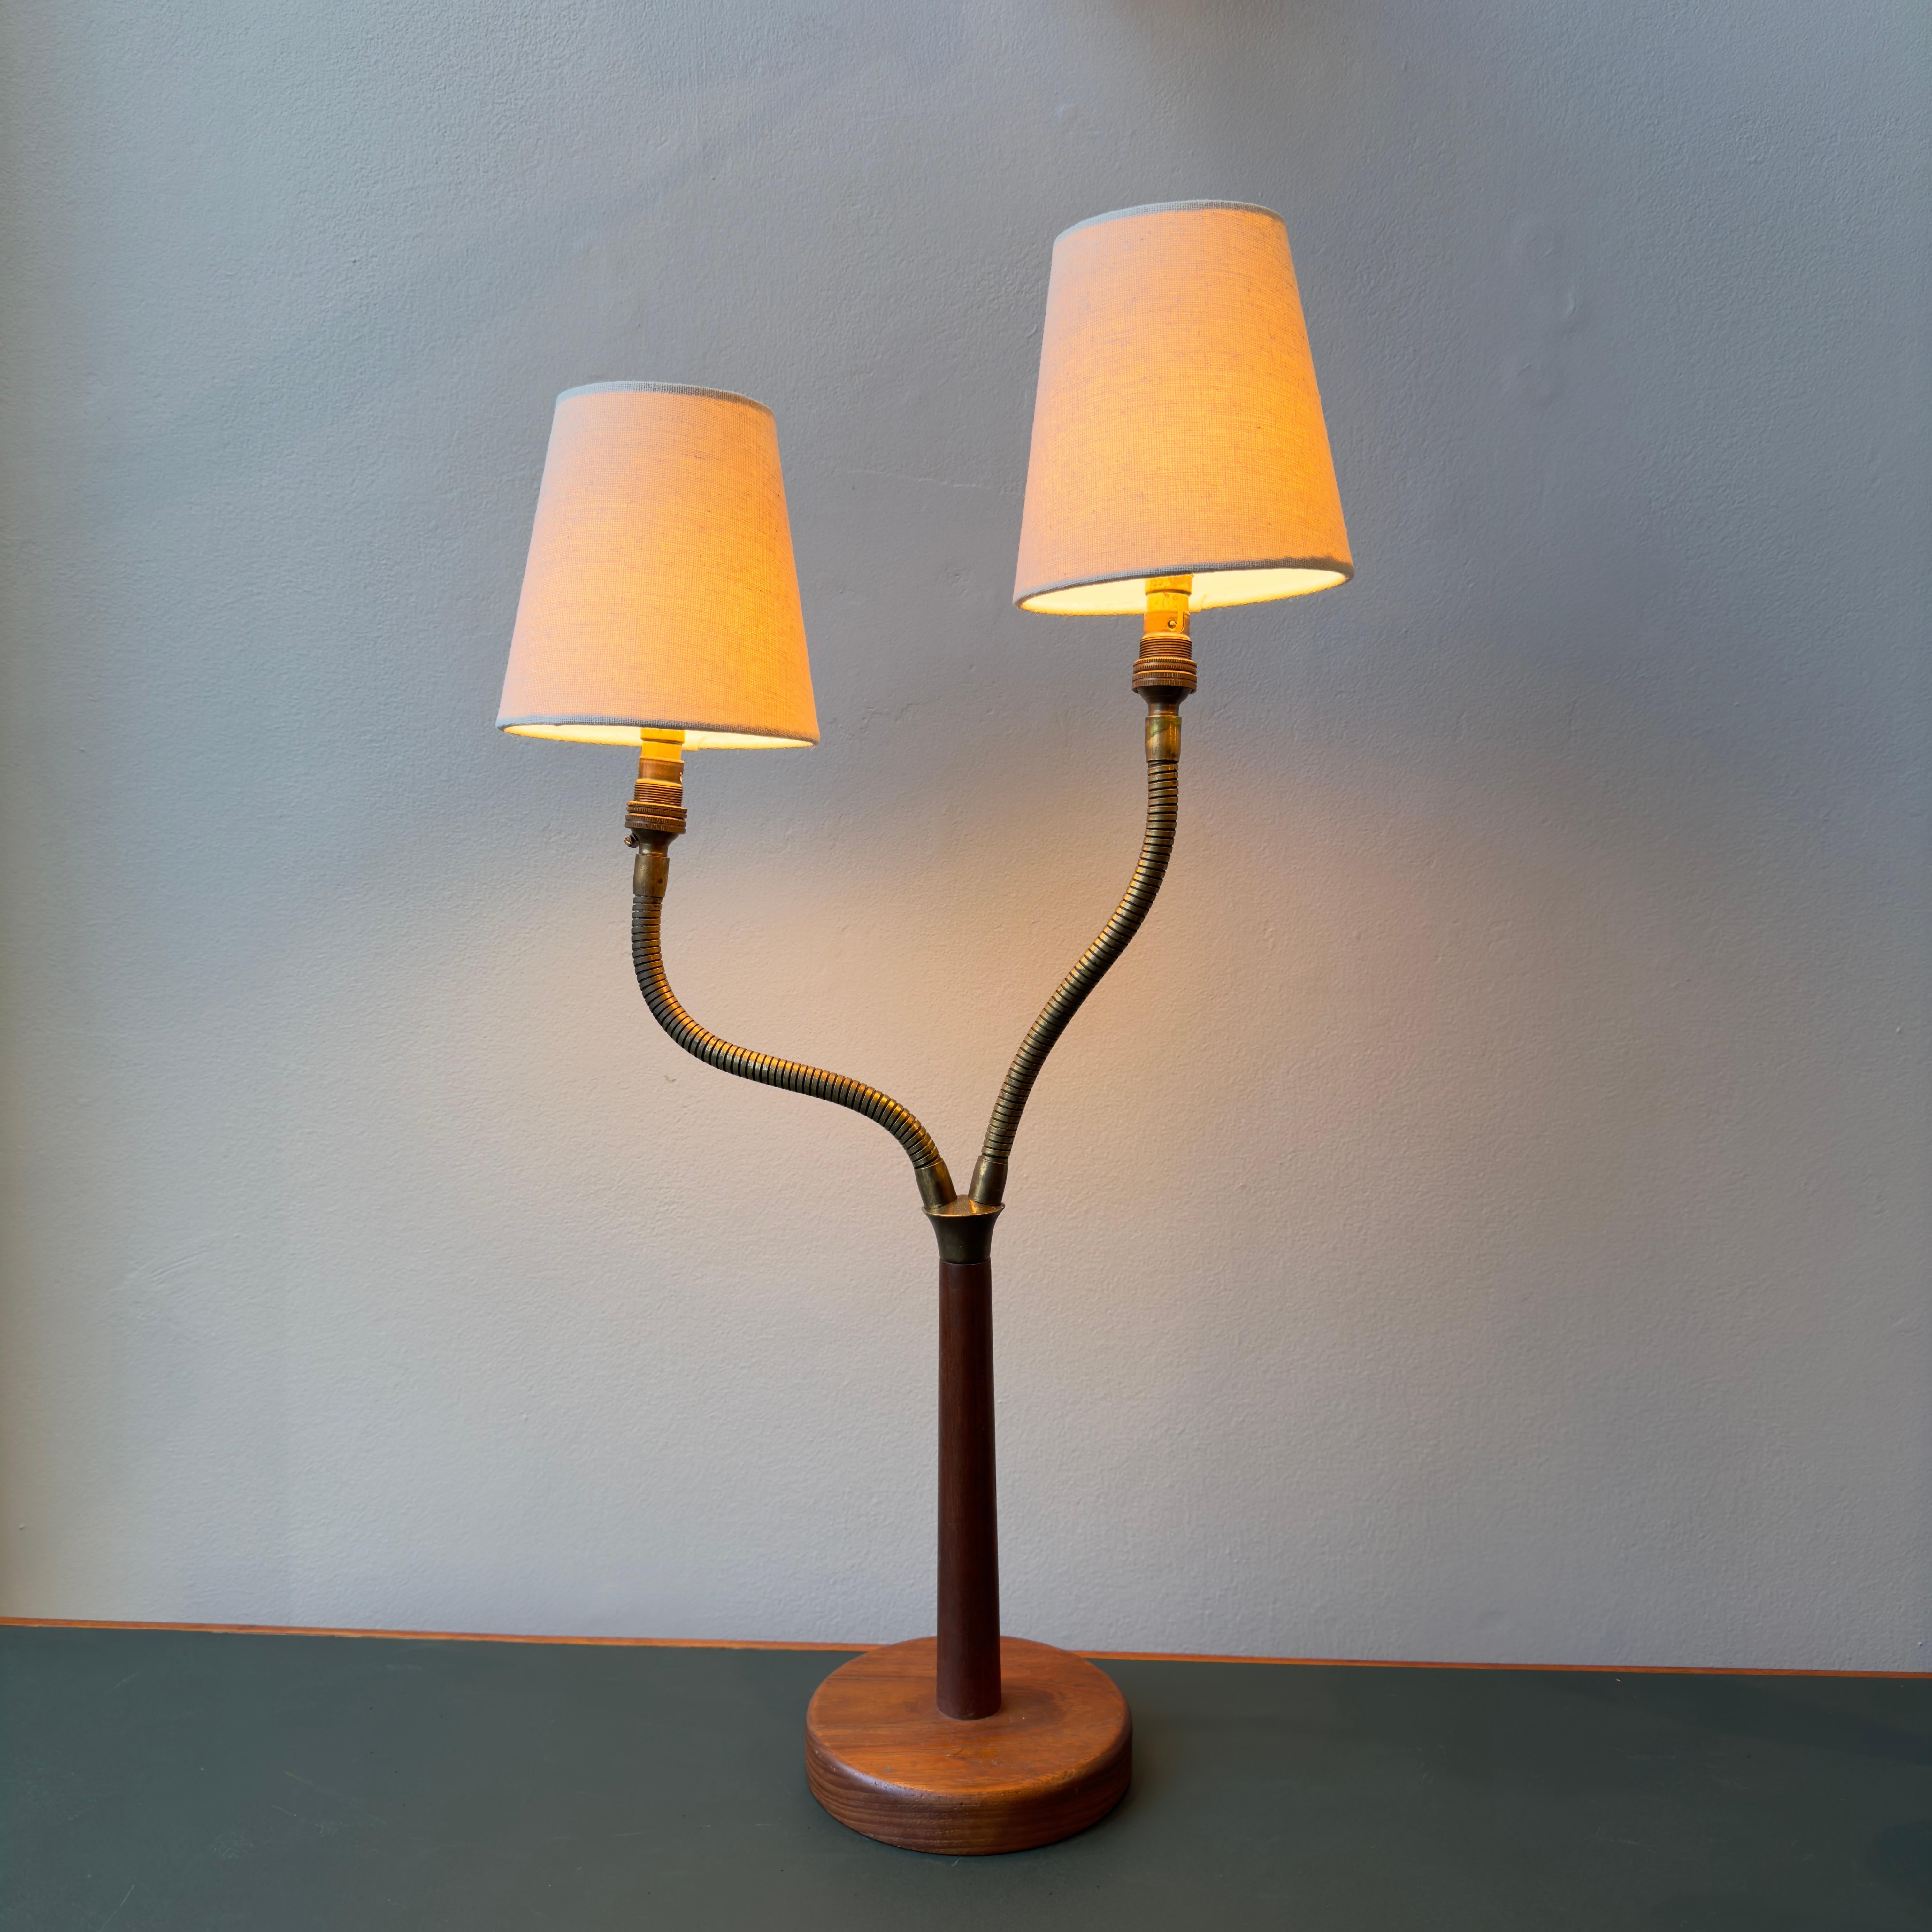 Made in Denmark during the 1950s, this twin headed table lamp is petite, yet sculptural. 

The base is fully teak, and supports two brass gooseneck stems which can be bent to your preference, whether that be simply symmetrical or playfully